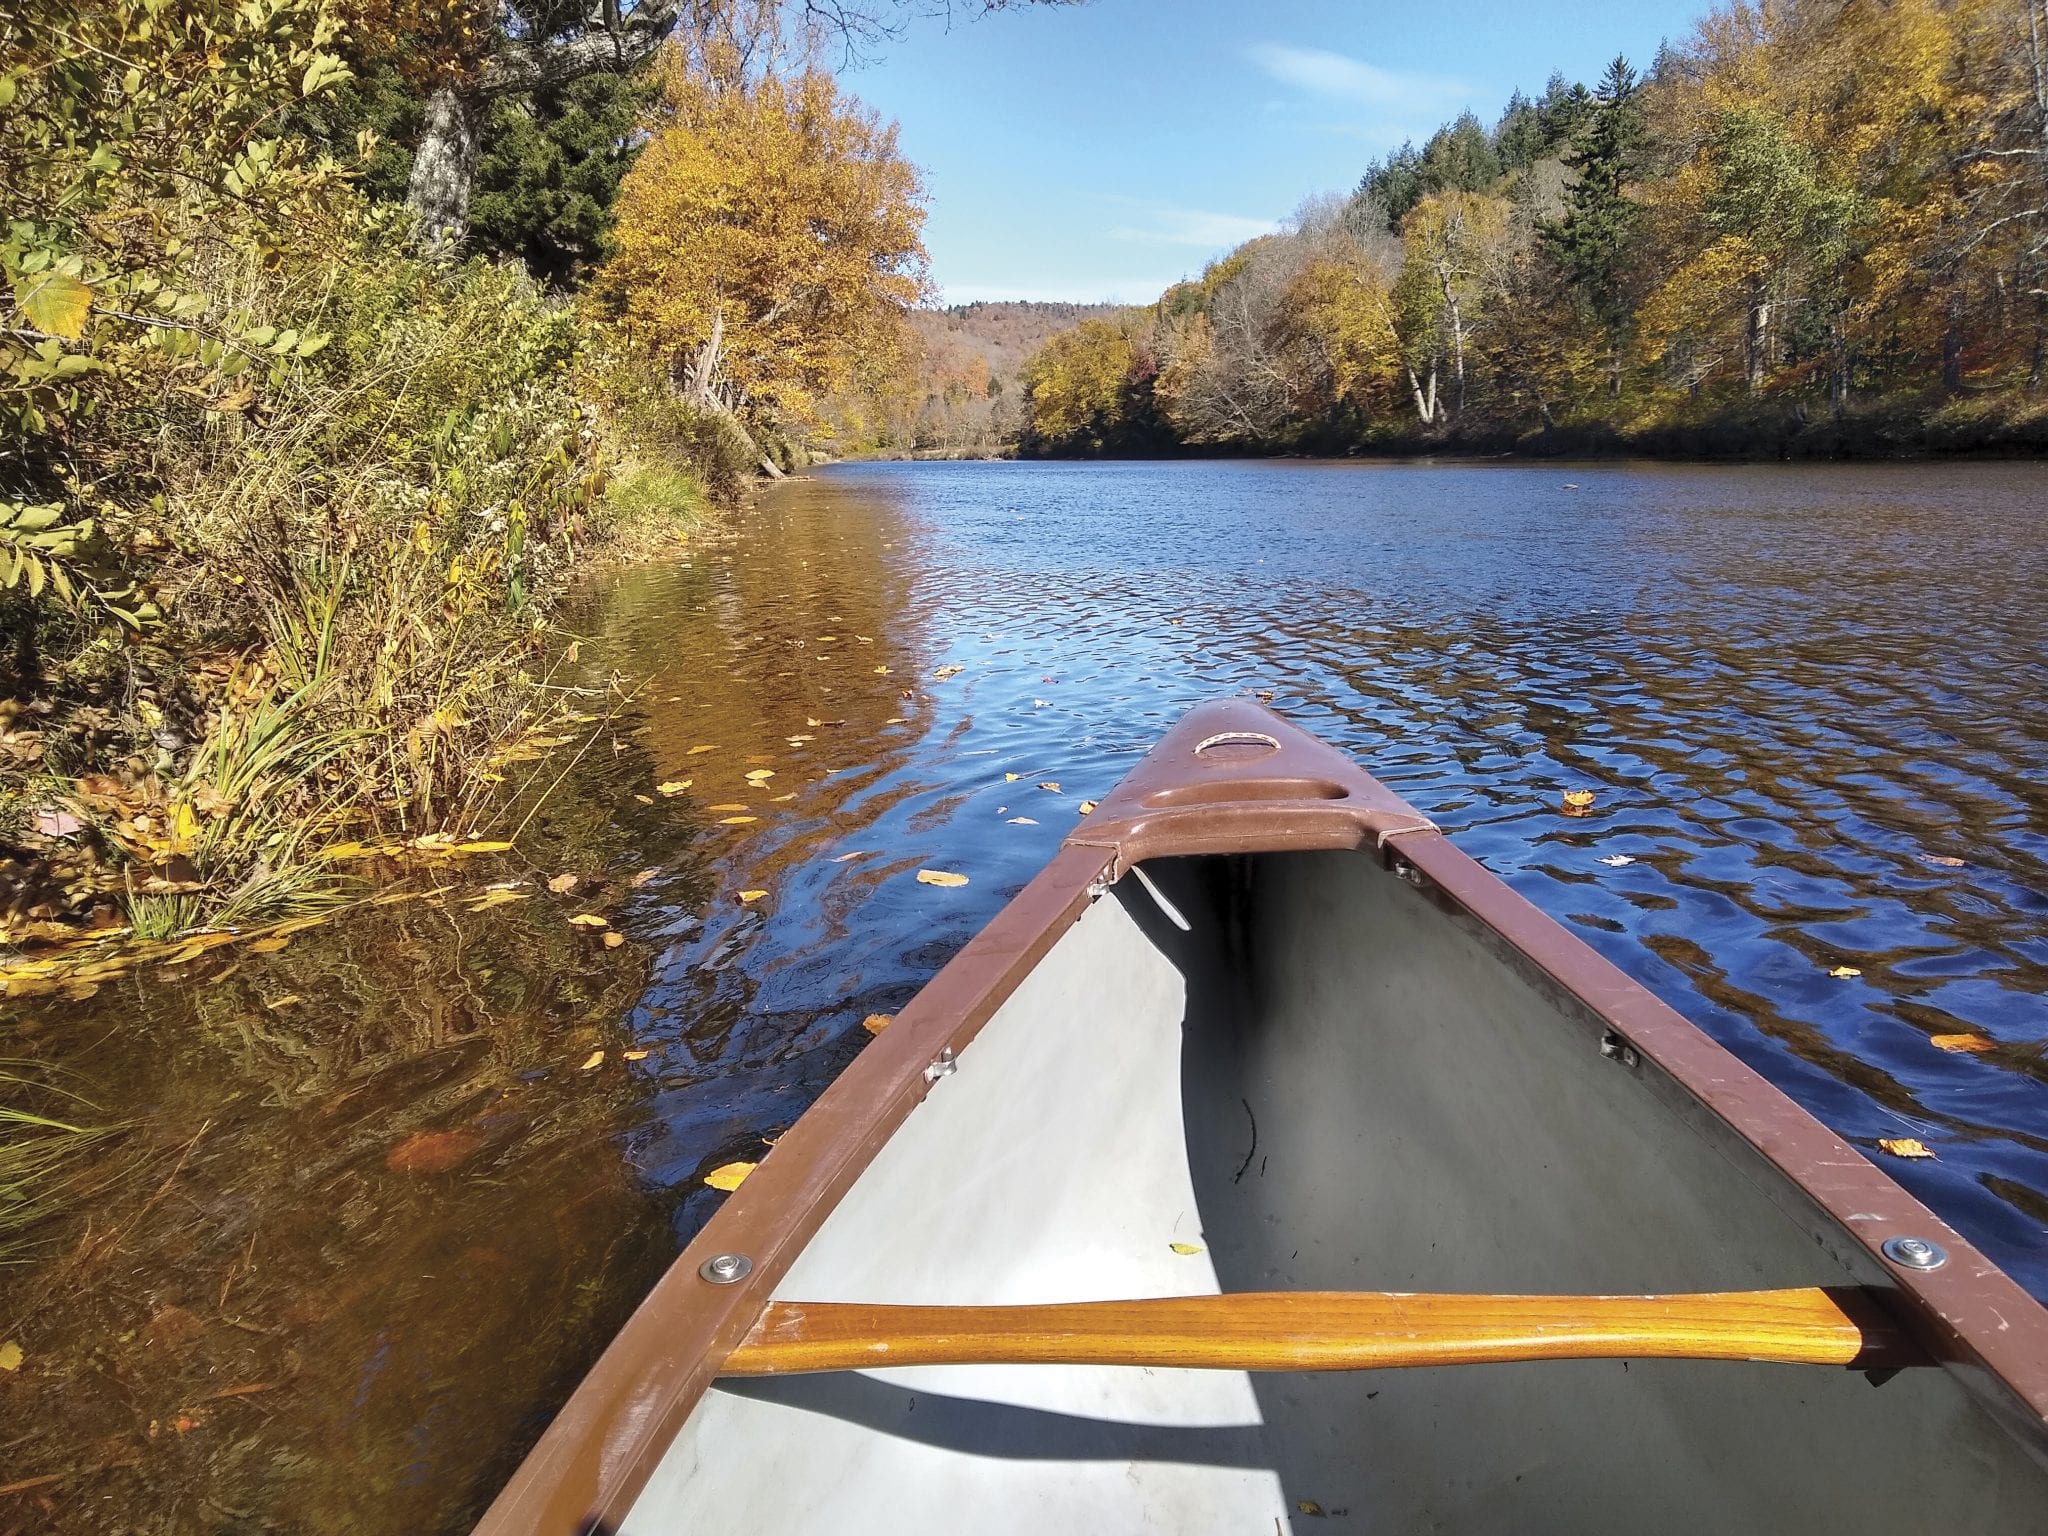 Invitation accepted: Paddling the Cedar River